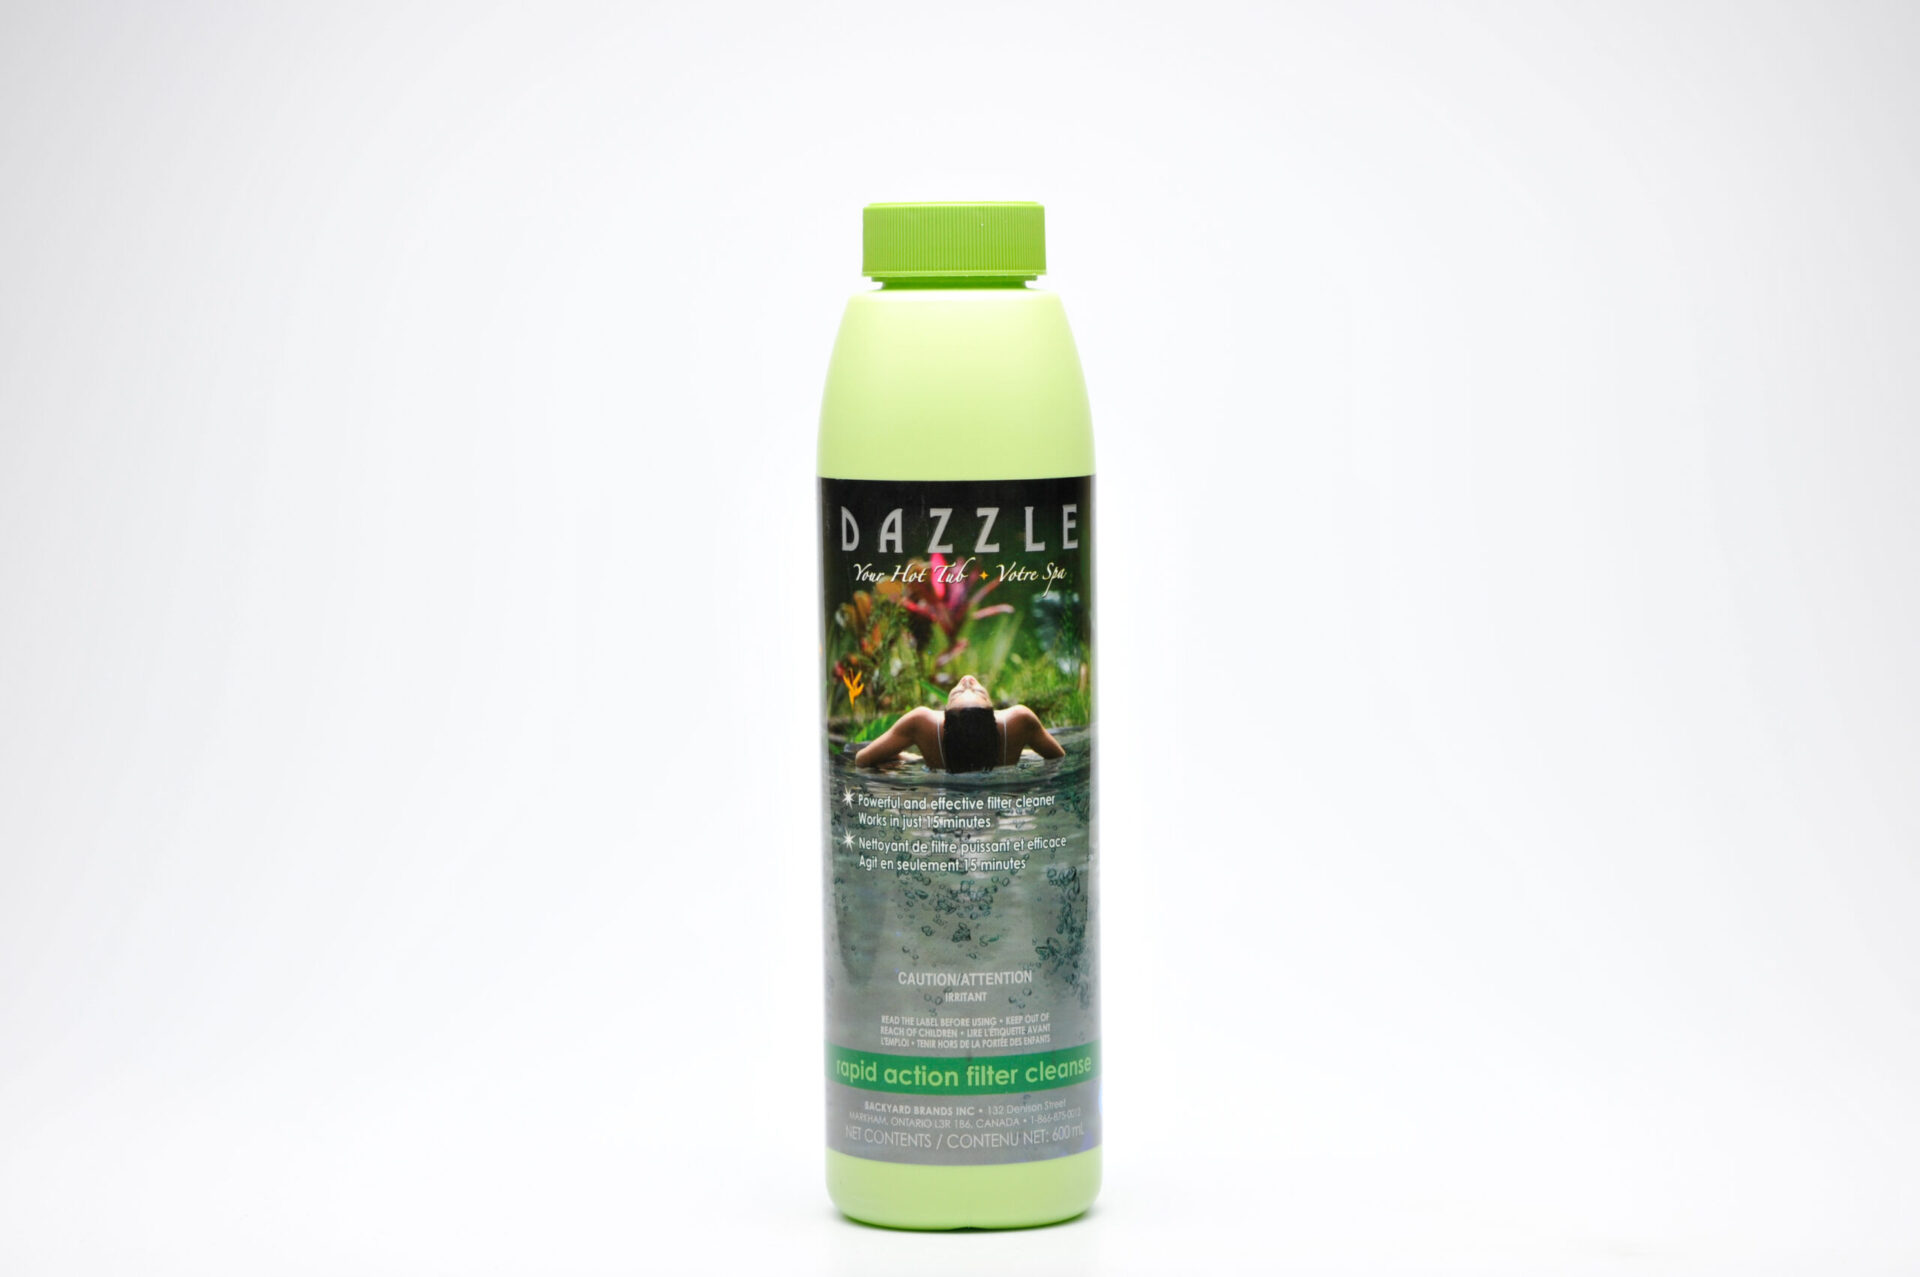 Dazzle Rapid Action Filter Cleanse 600ml scaled - Dazzle Rapid Action Filter Cleanse 600ml